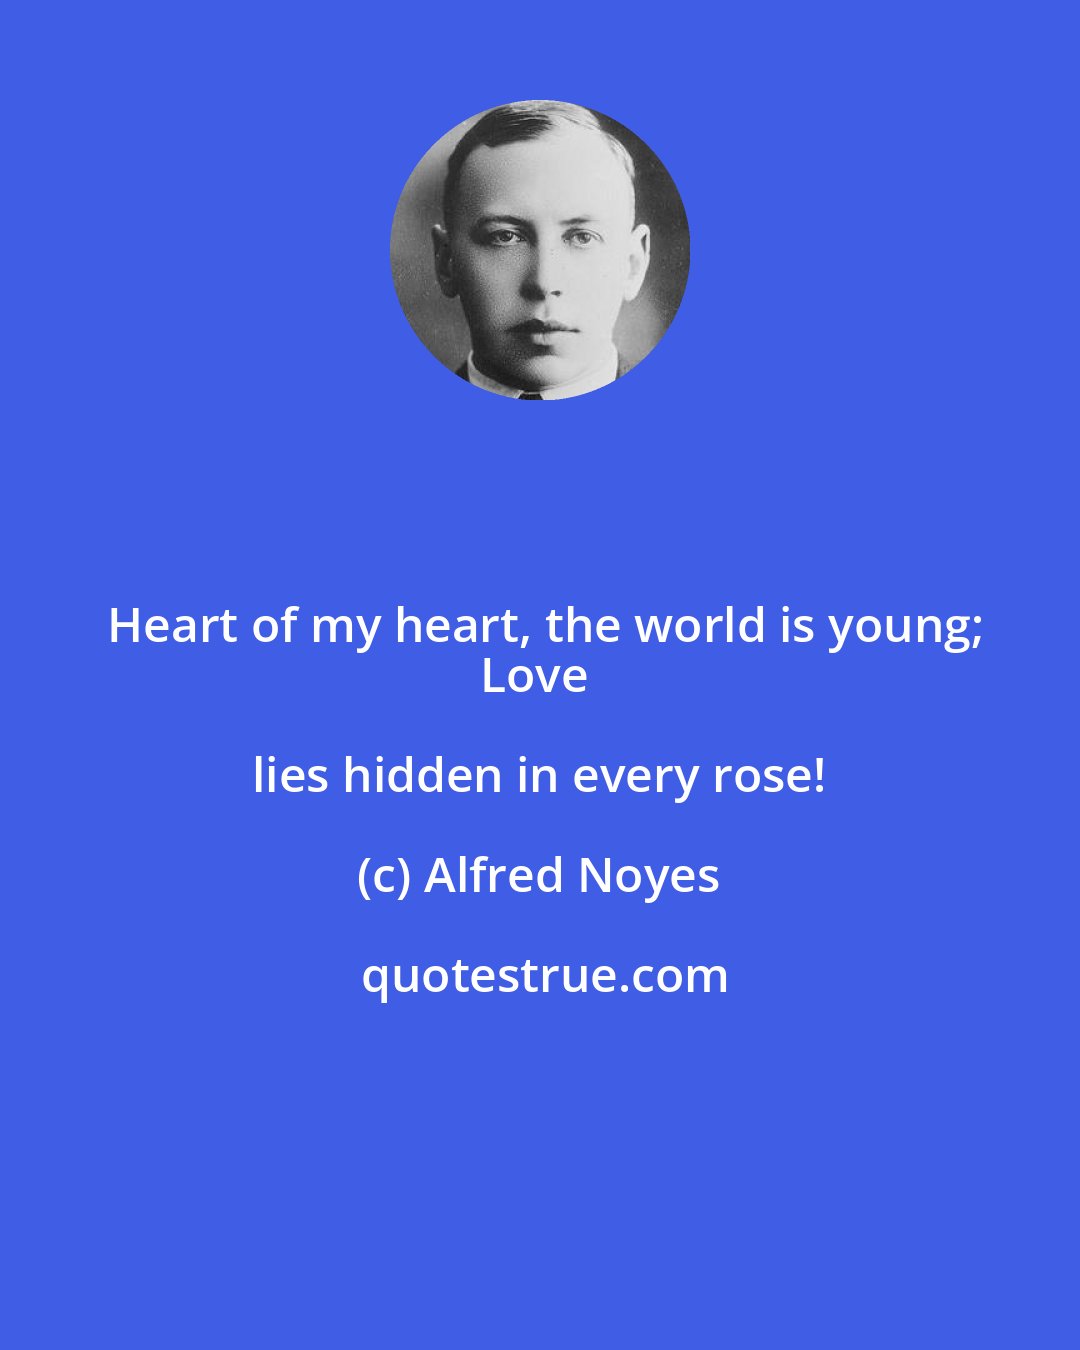 Alfred Noyes: Heart of my heart, the world is young;
Love lies hidden in every rose!